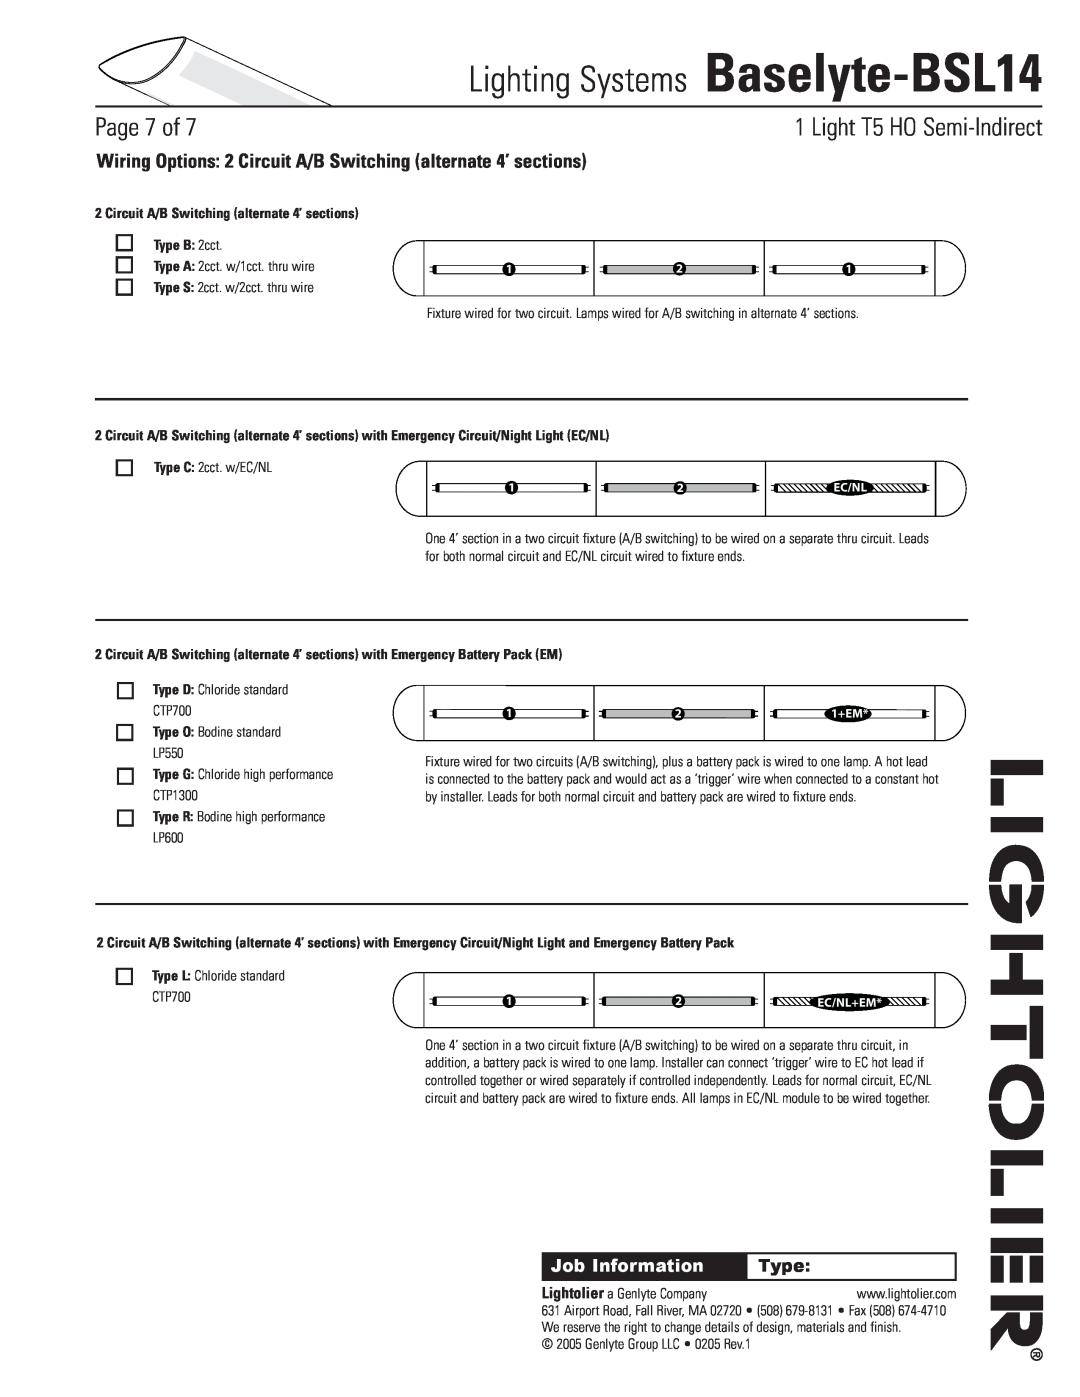 Lightolier Baselyte-BSL14 Circuit A/B Switching alternate 4’ sections, Type B 2cct, Type O Bodine standard LP550, Page of 